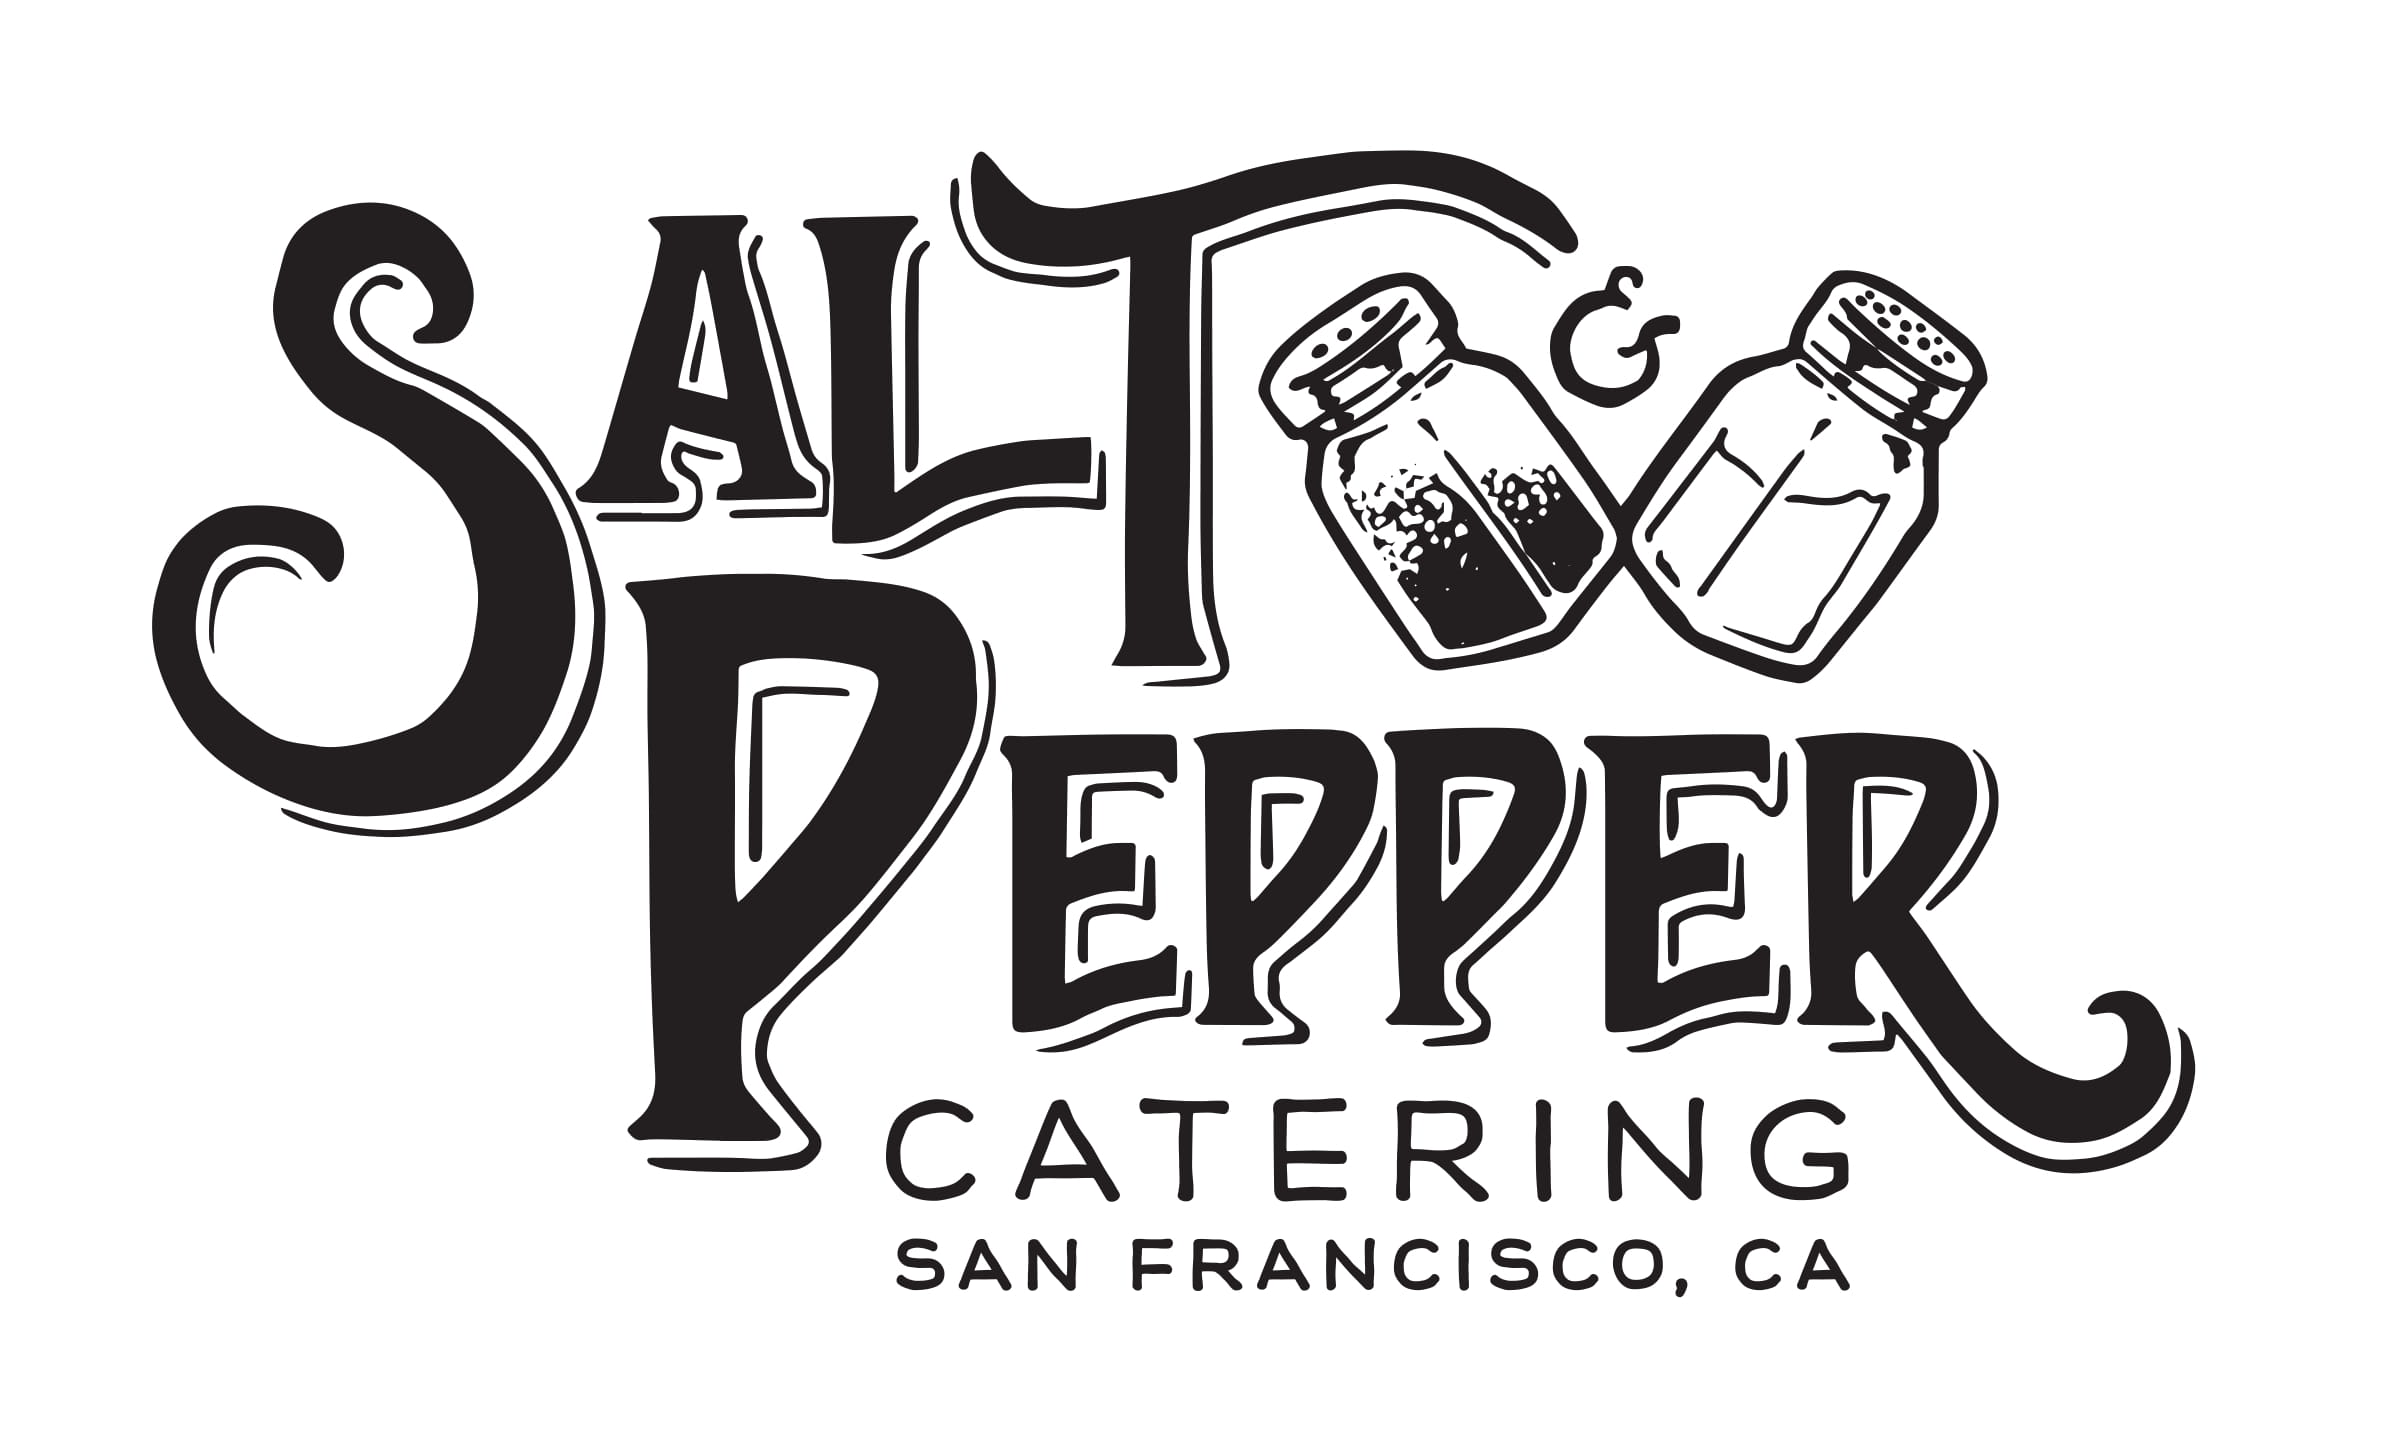 Salt and Pepper Catering